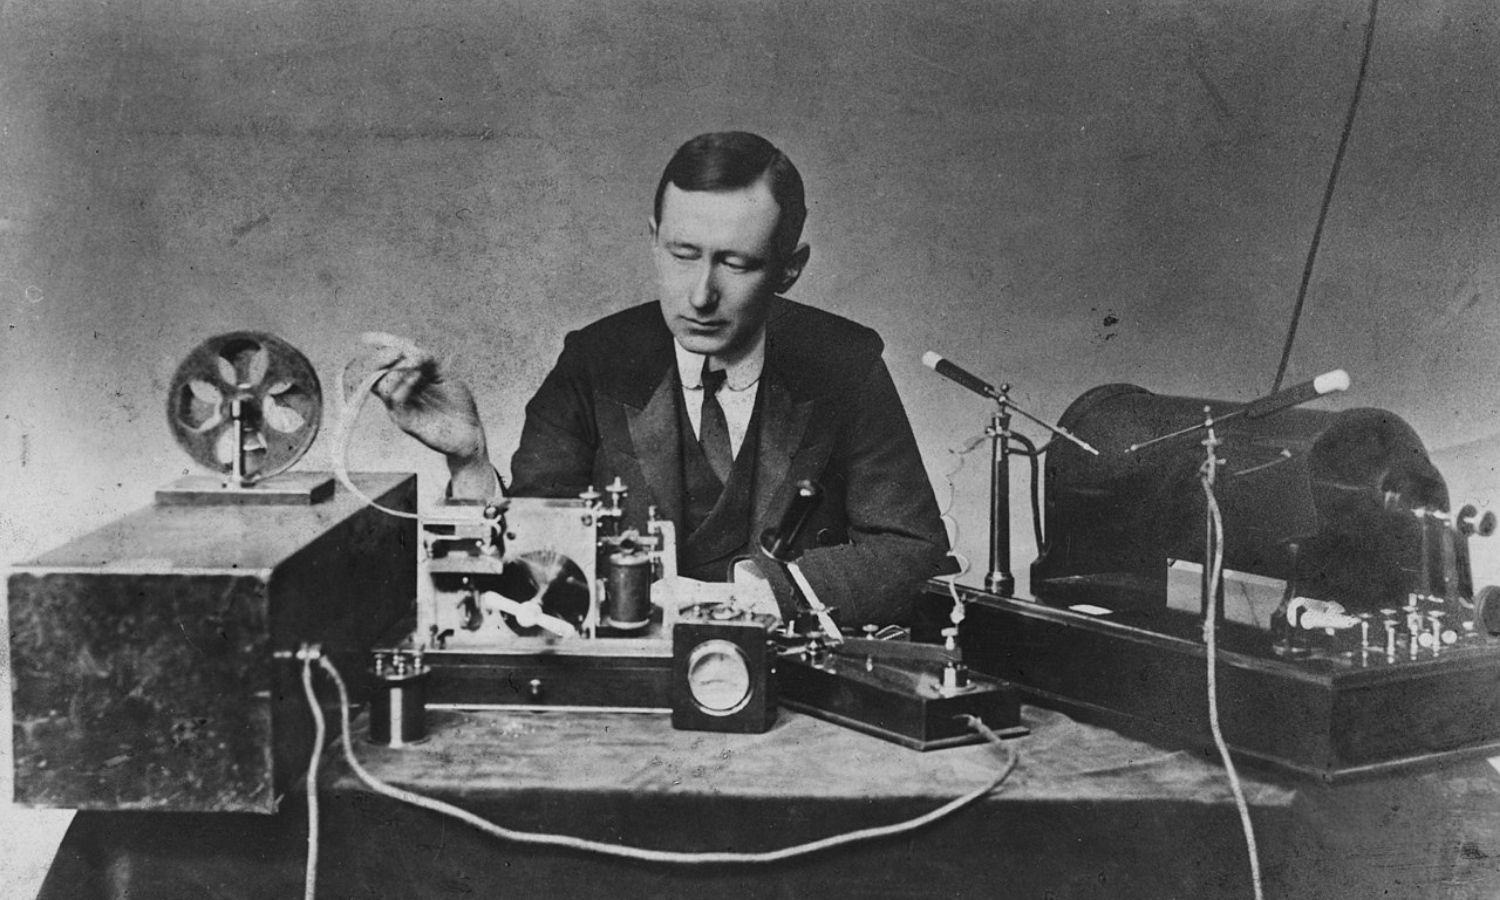 OTD in 1896: Inventor and electrical engineer Guglielmo Marconi applied for the patents for the radio.